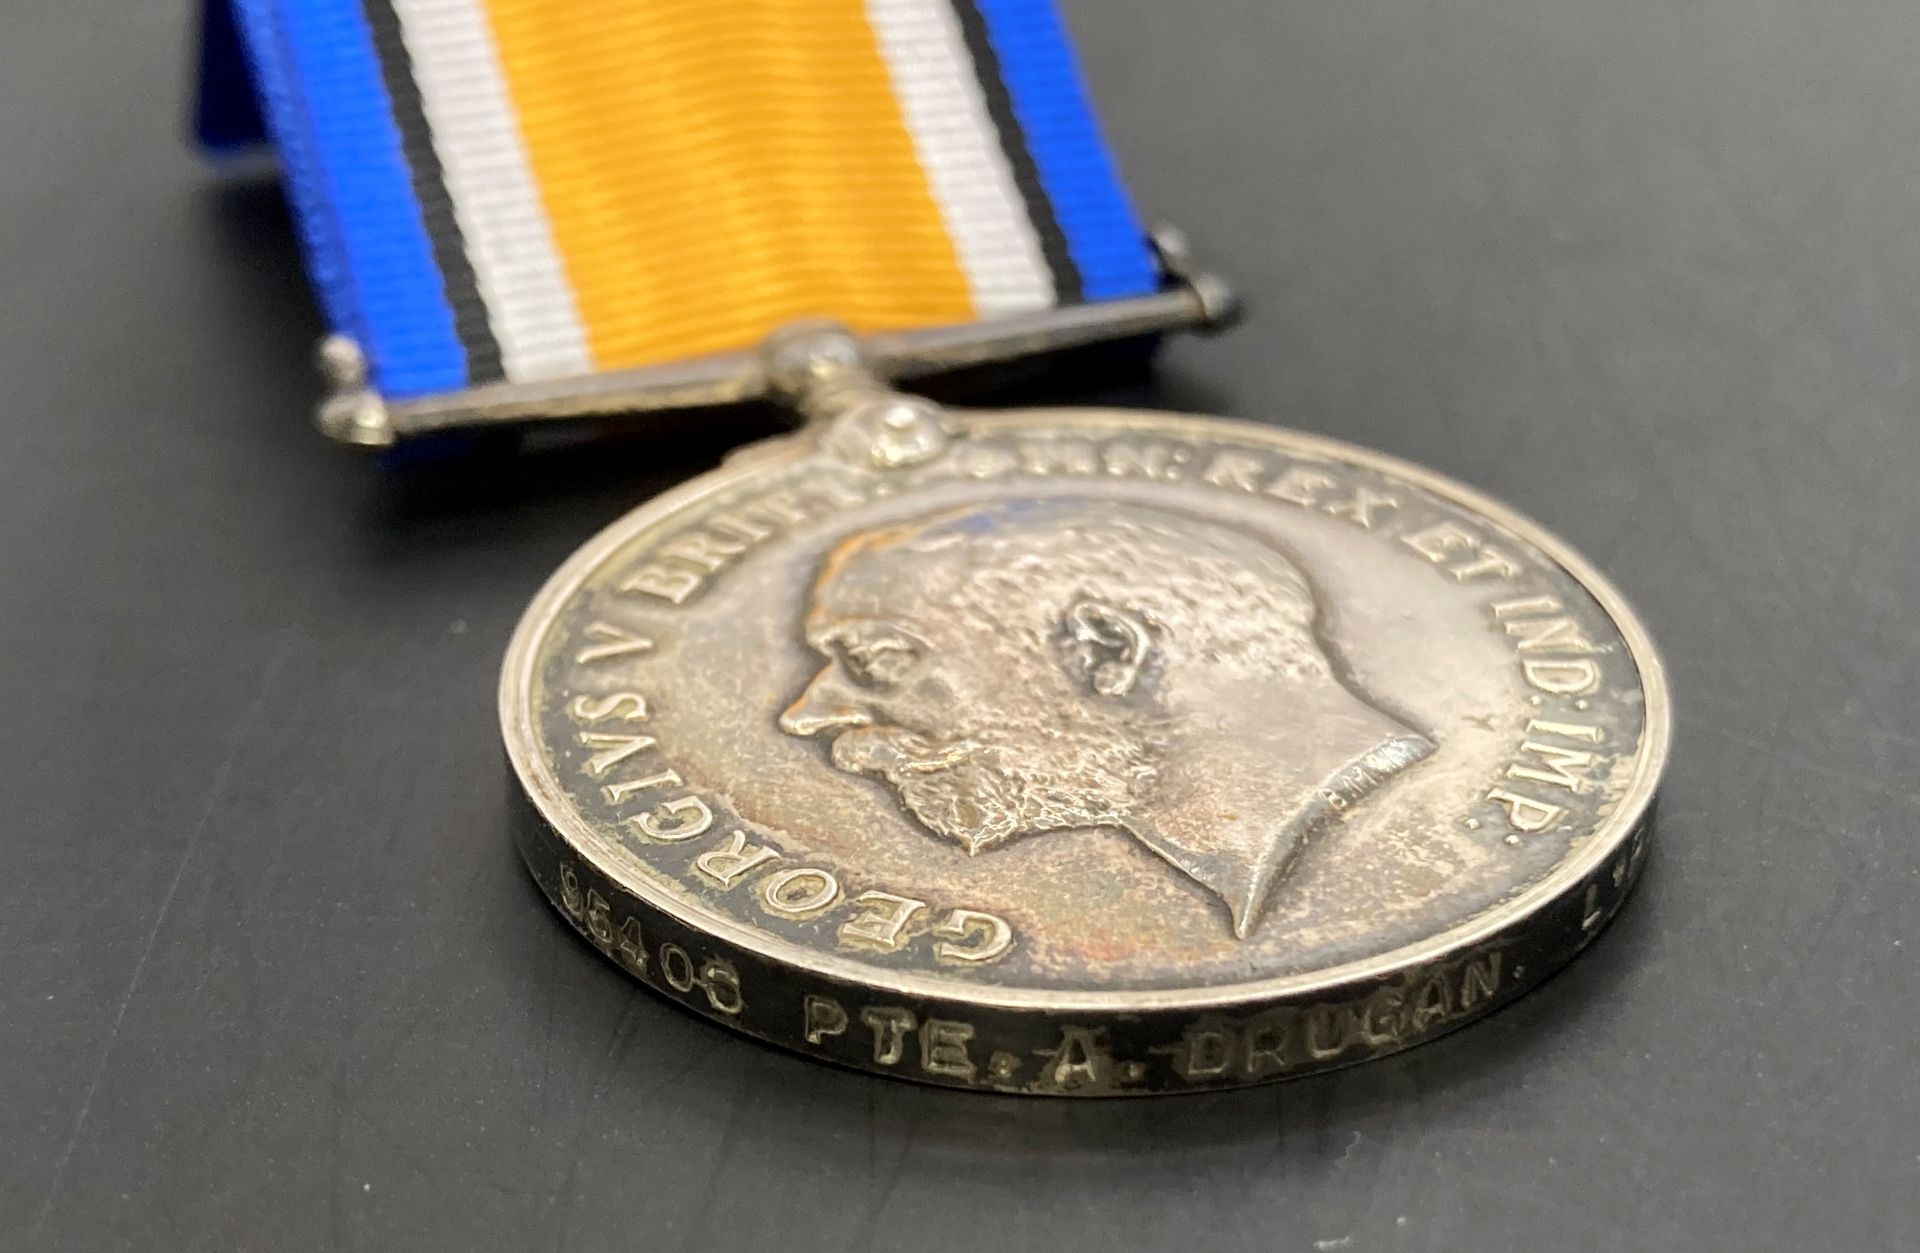 Two First World War medals - War Medal and Victory Medal complete with ribbons and box of issue to - Image 2 of 3